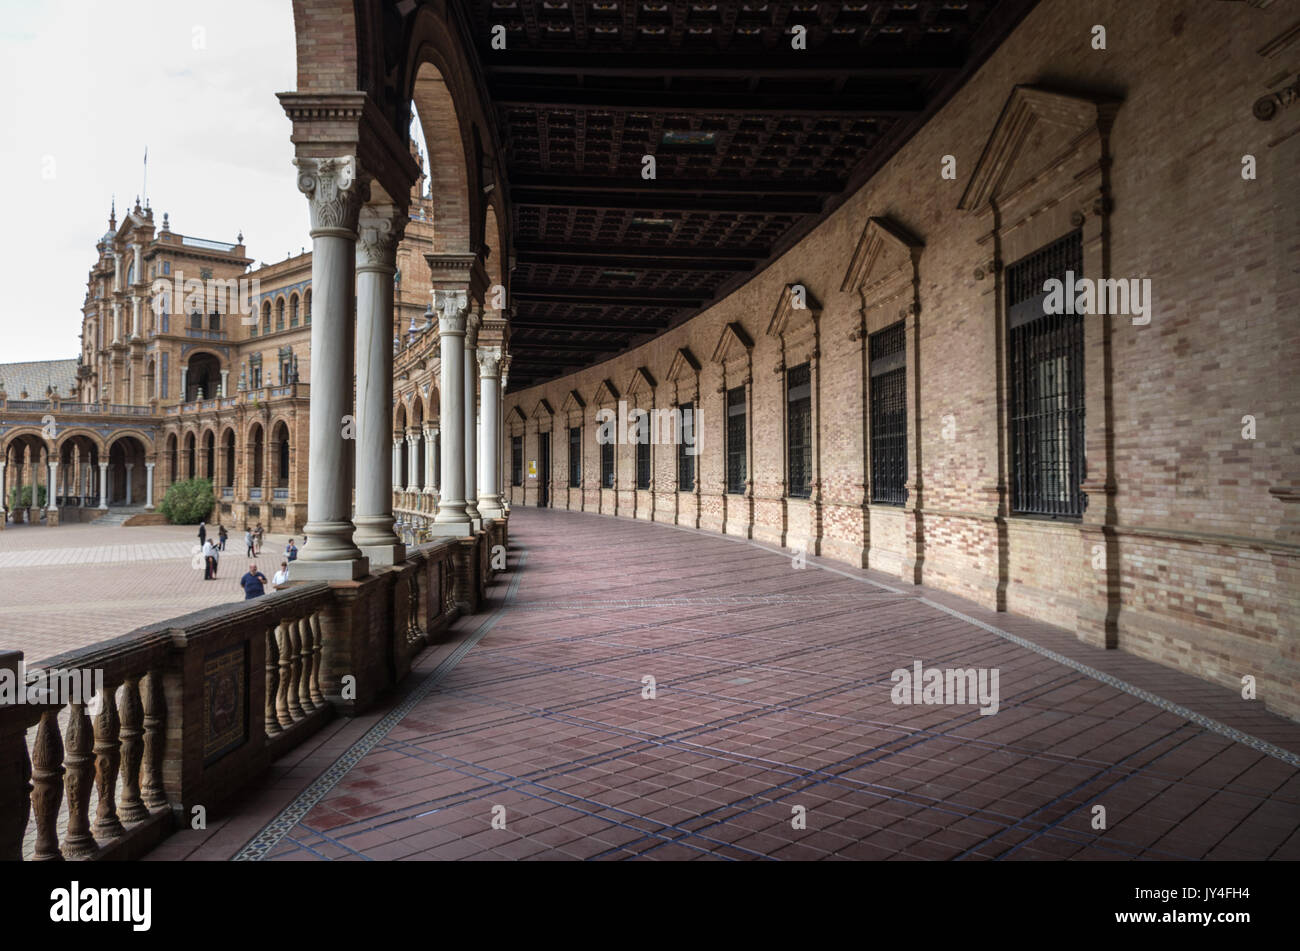 Looking down the wing of Plaza de España, Seville, Spain Stock Photo